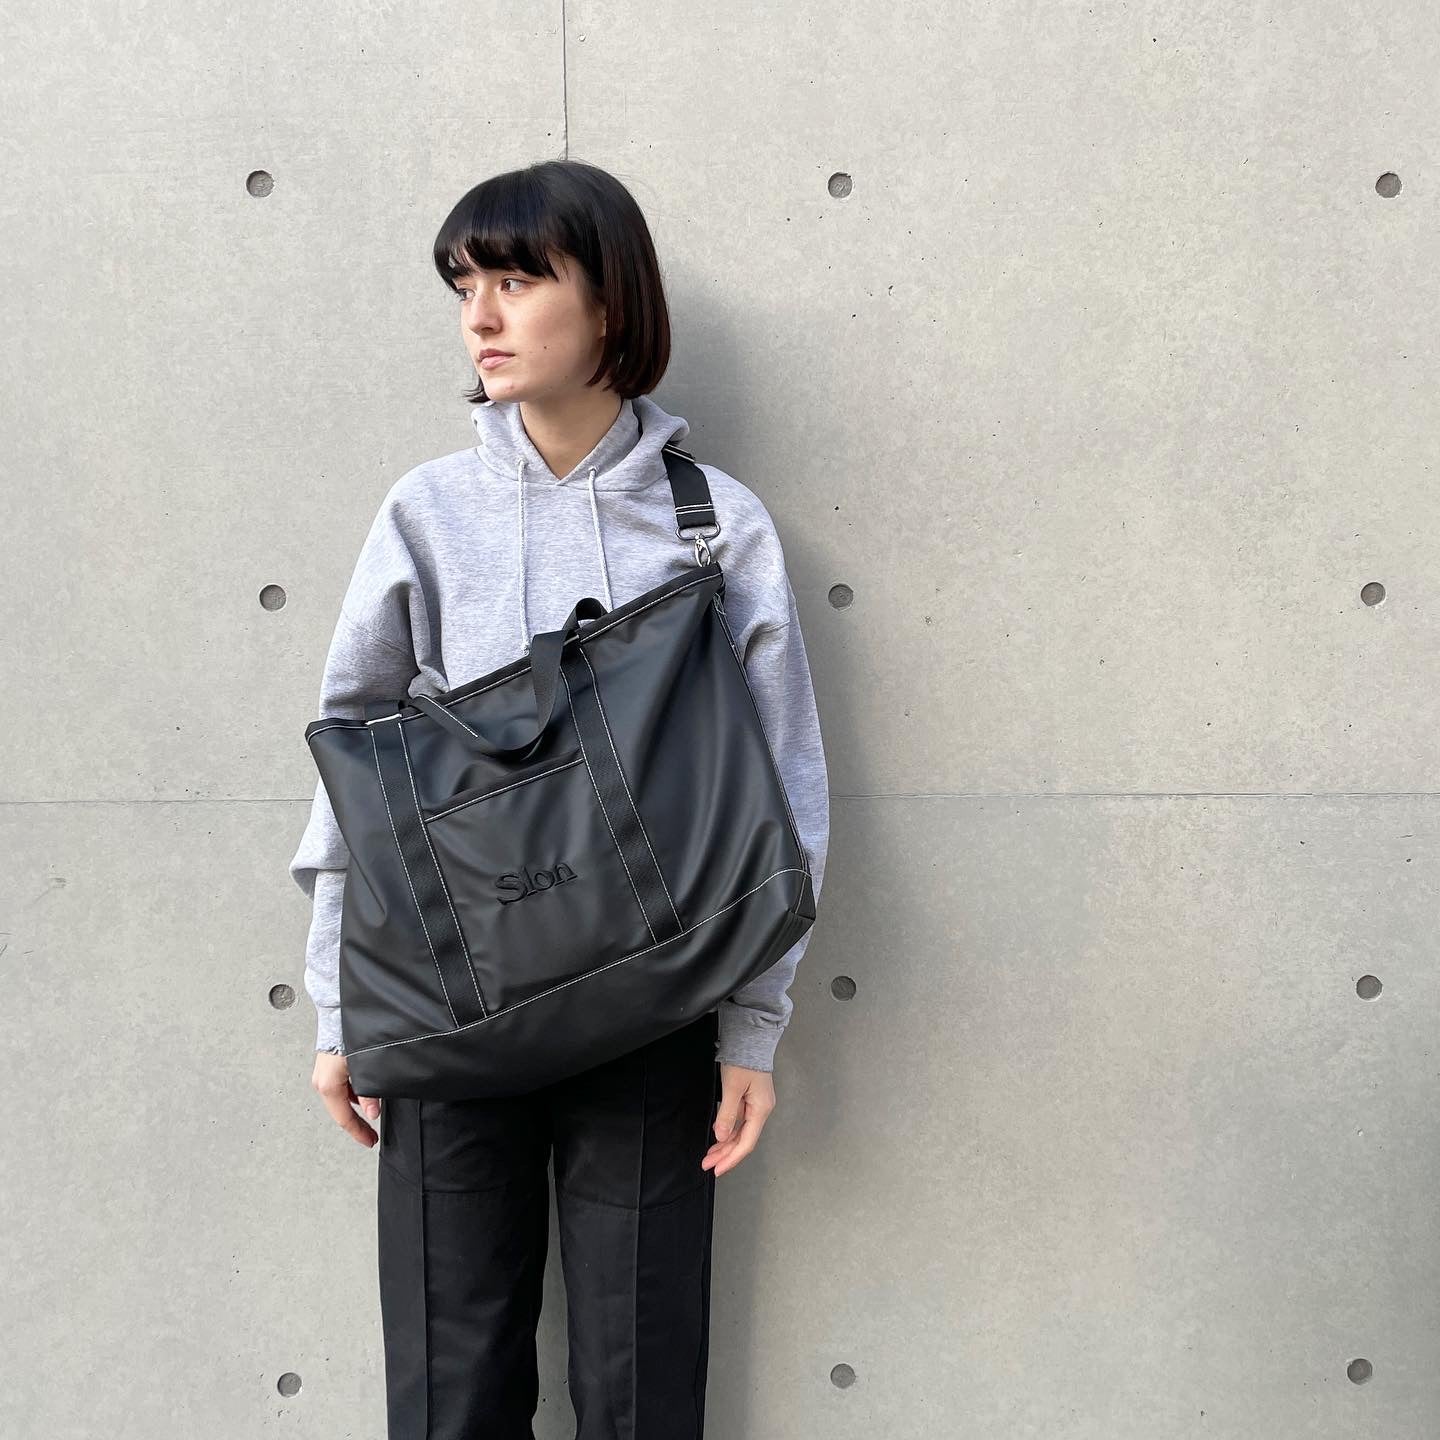 SLON x PACKING Utility Stitched Black Tote Bag